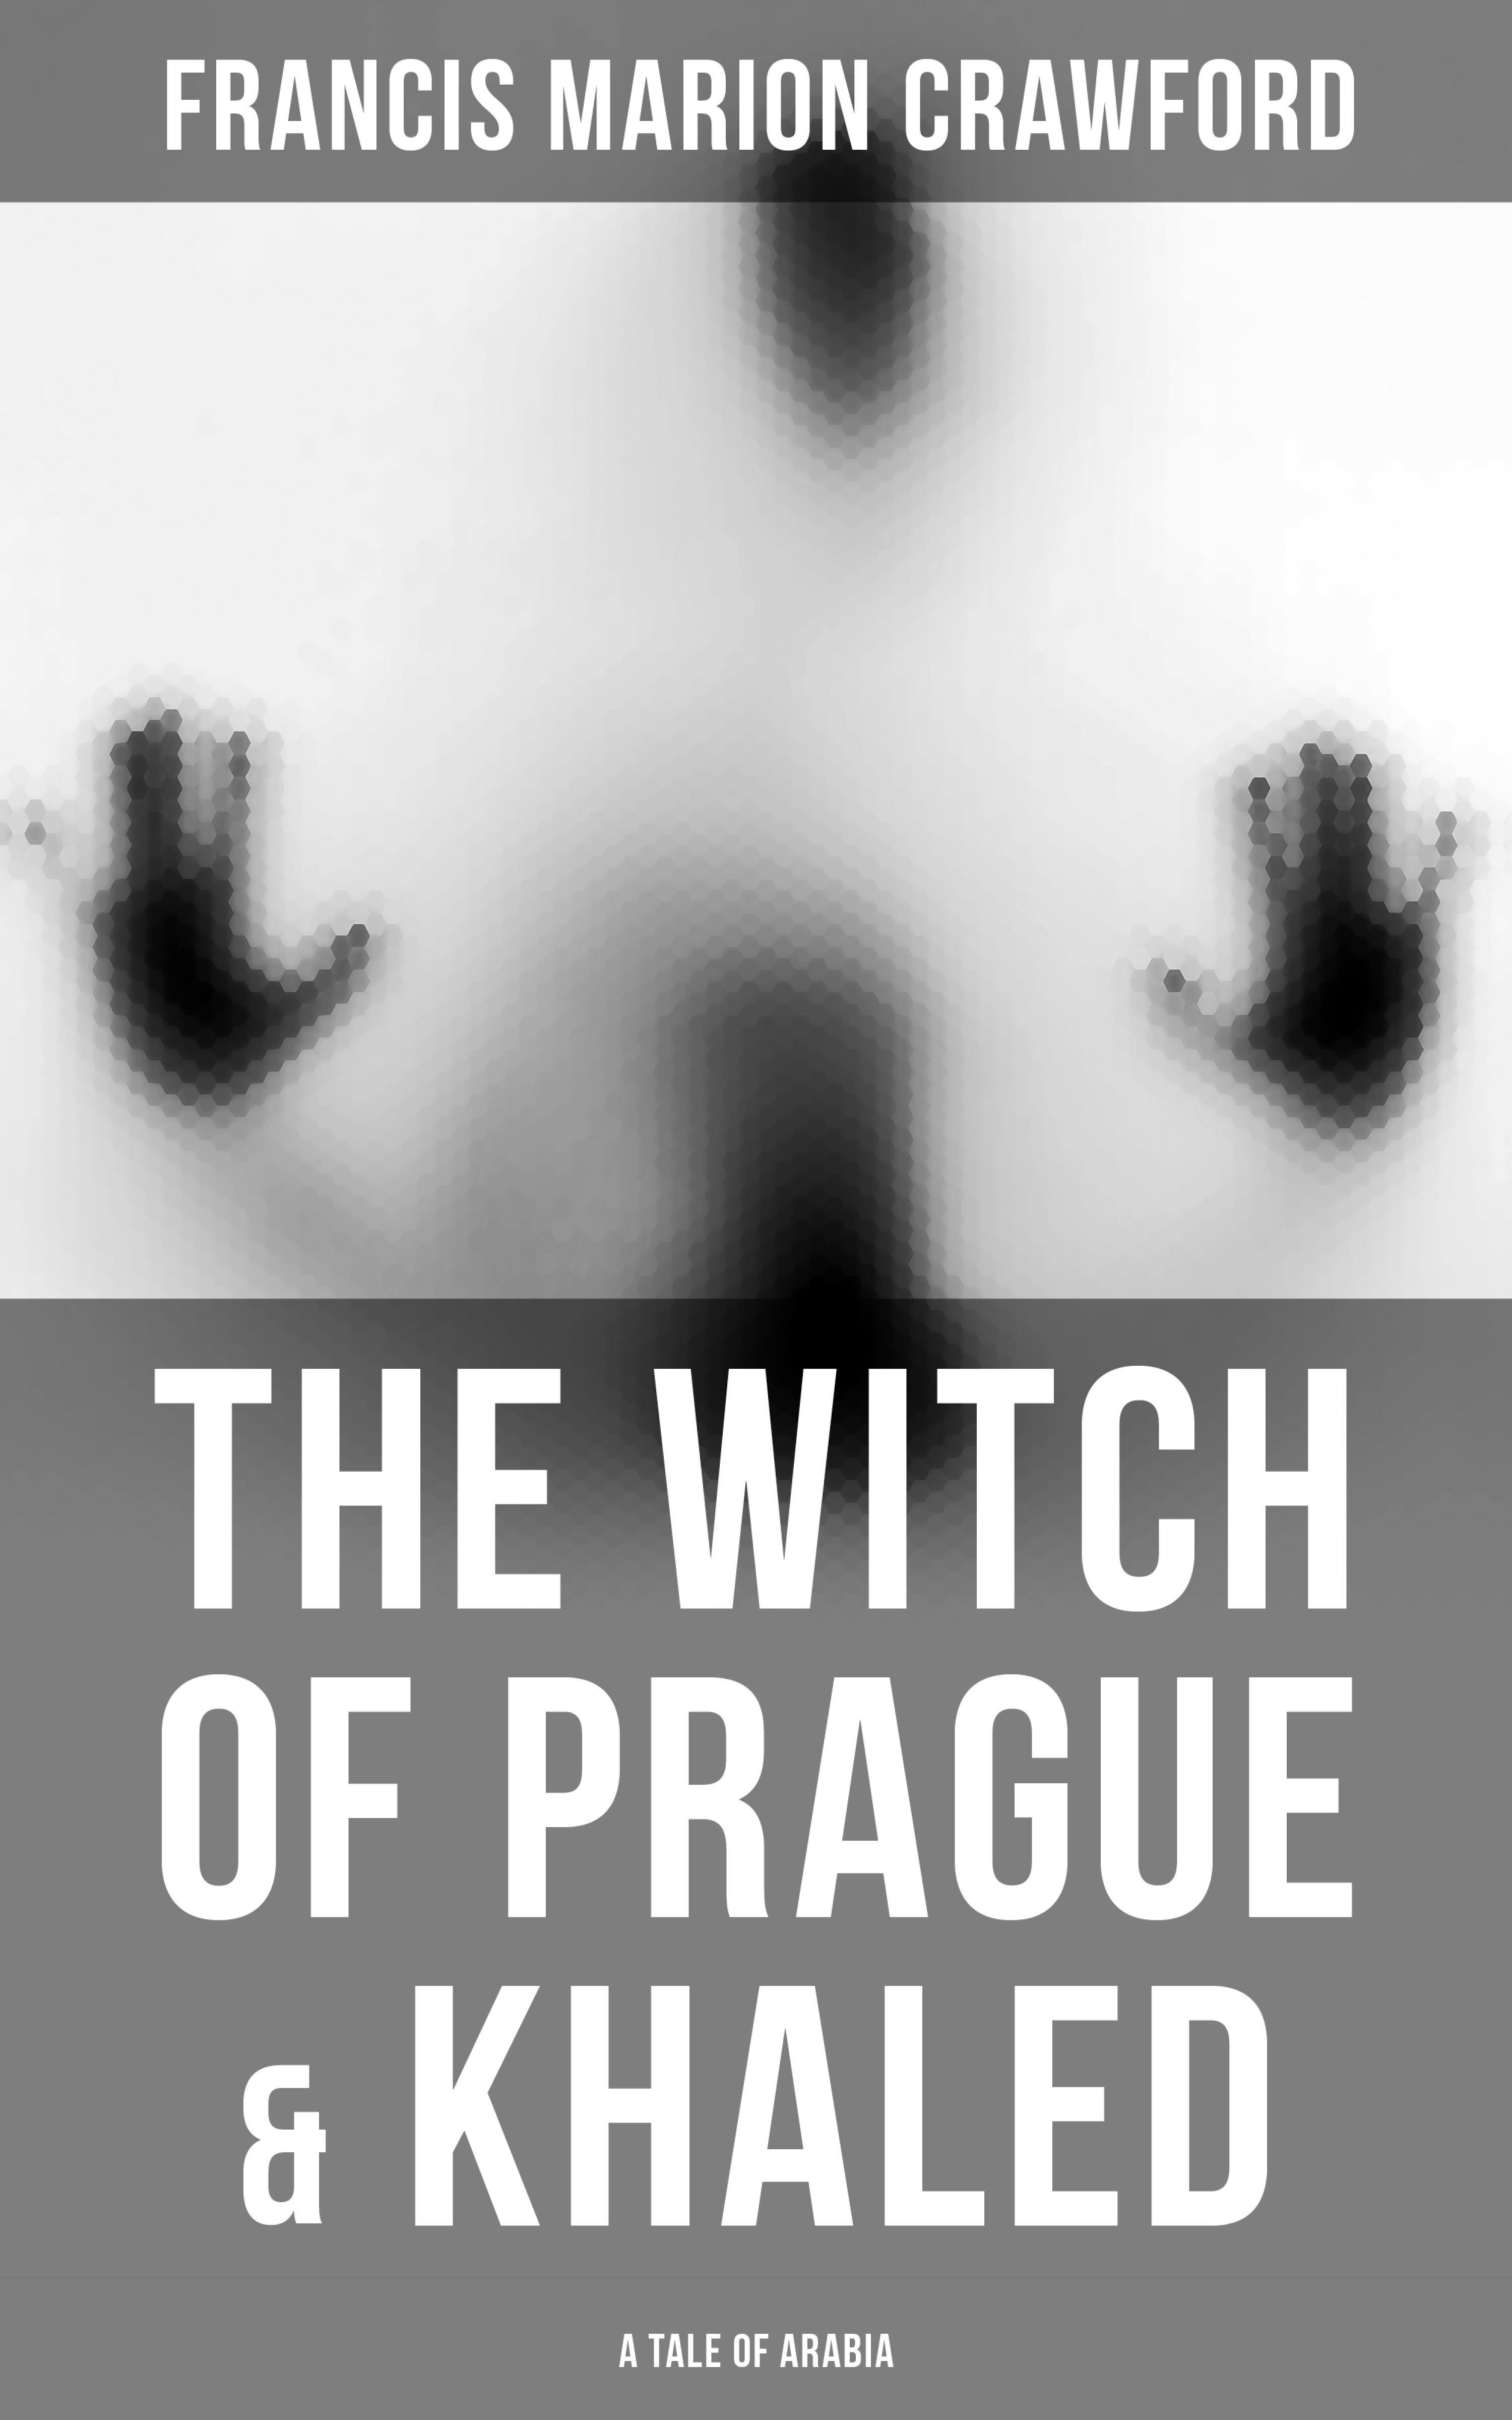 The Witch Of Prague & Other Stories by F. Marion Crawford